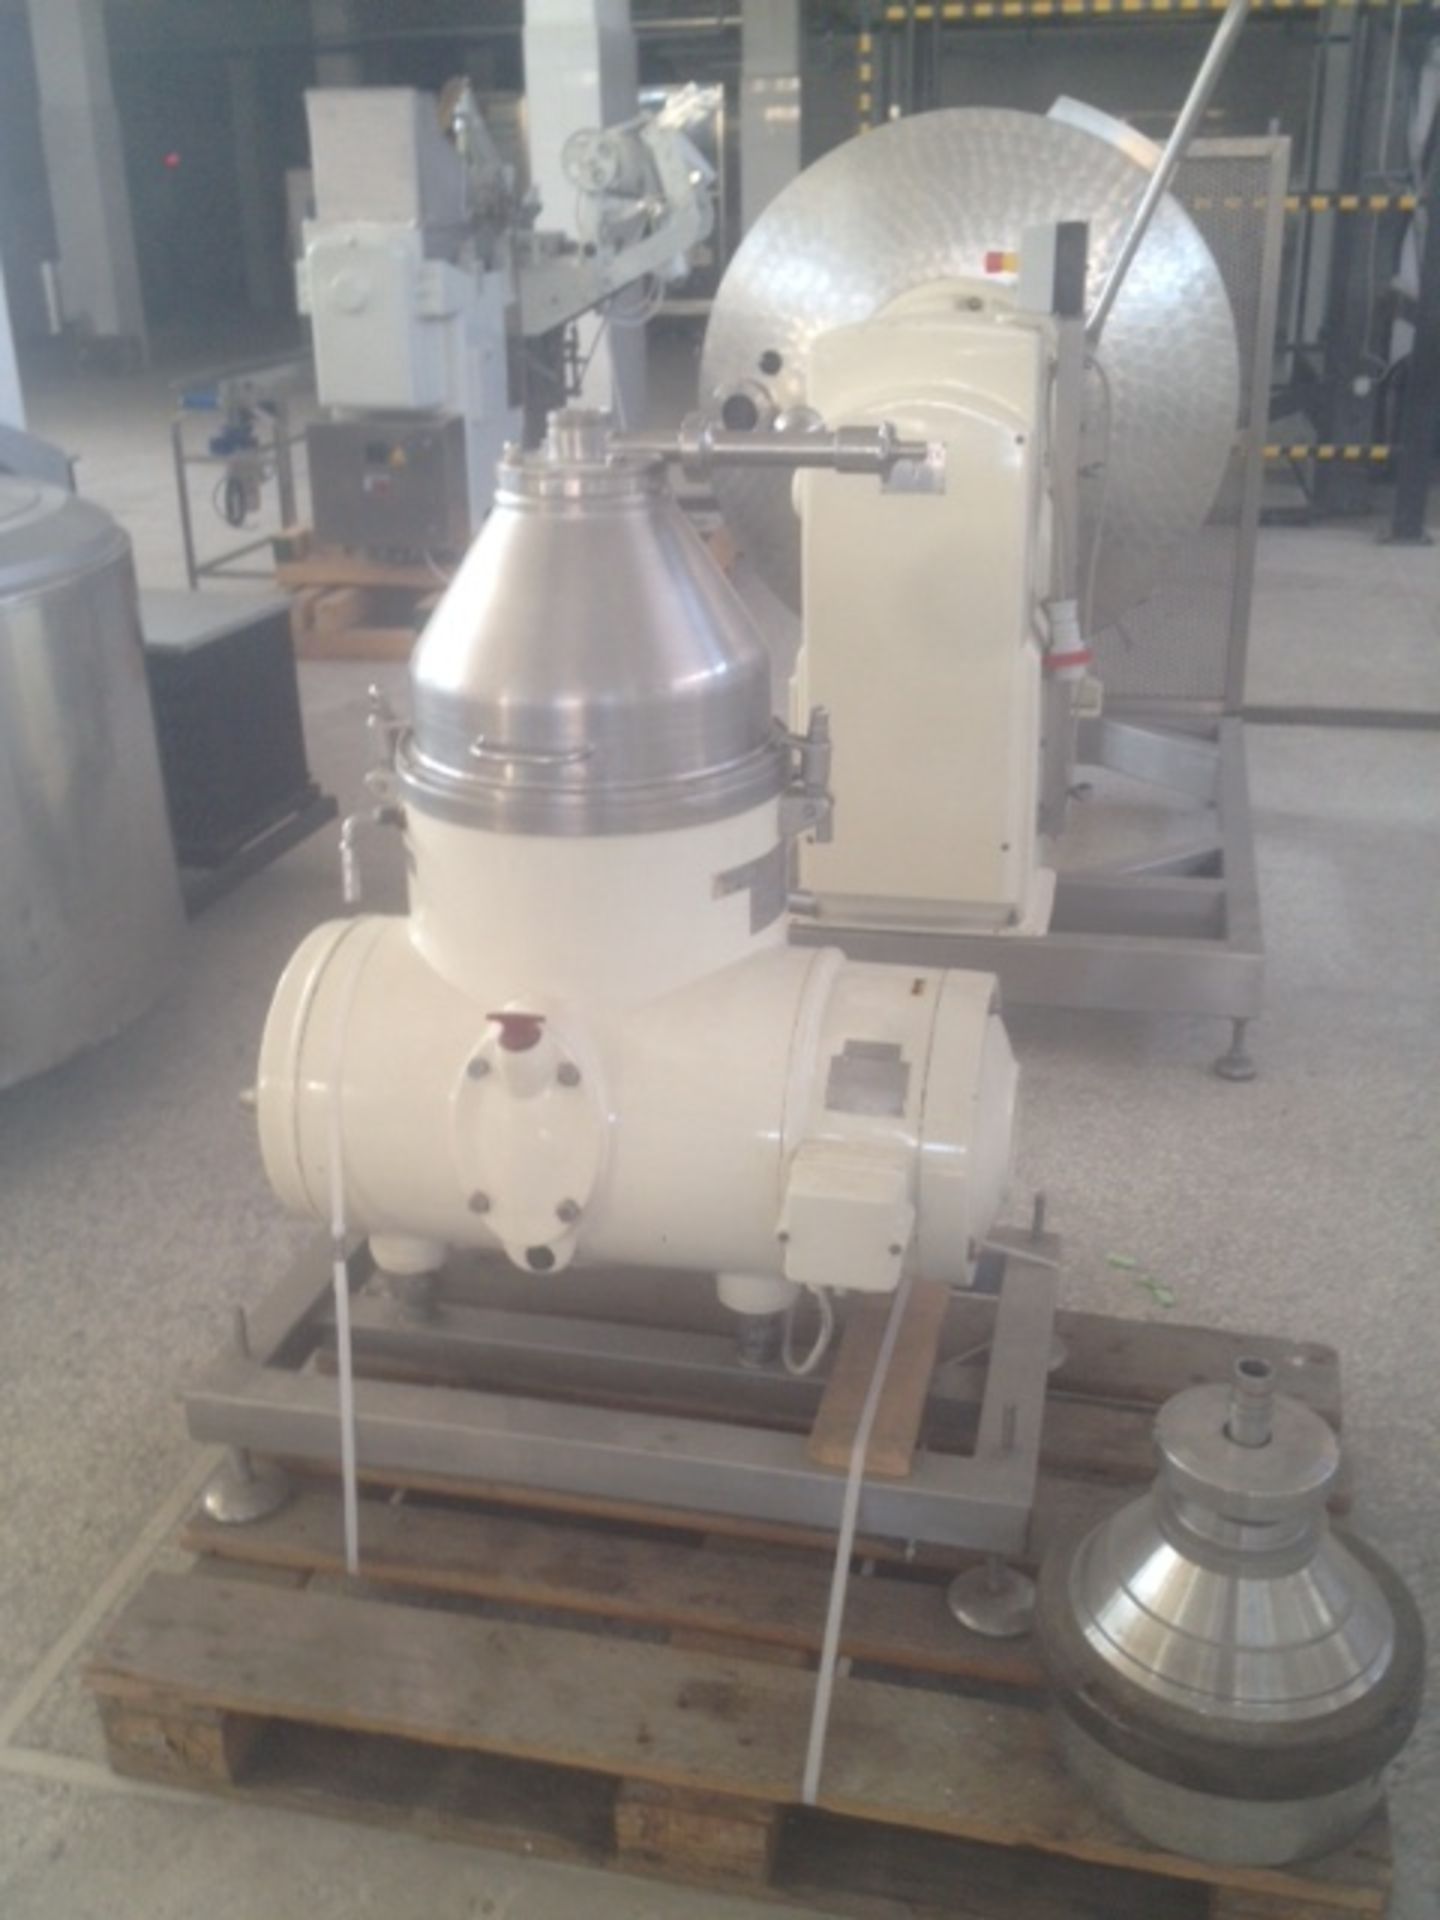 Westfalia Separator, 1000-1500 L, Recently Refurbished, Very Good Condition - Image 3 of 3